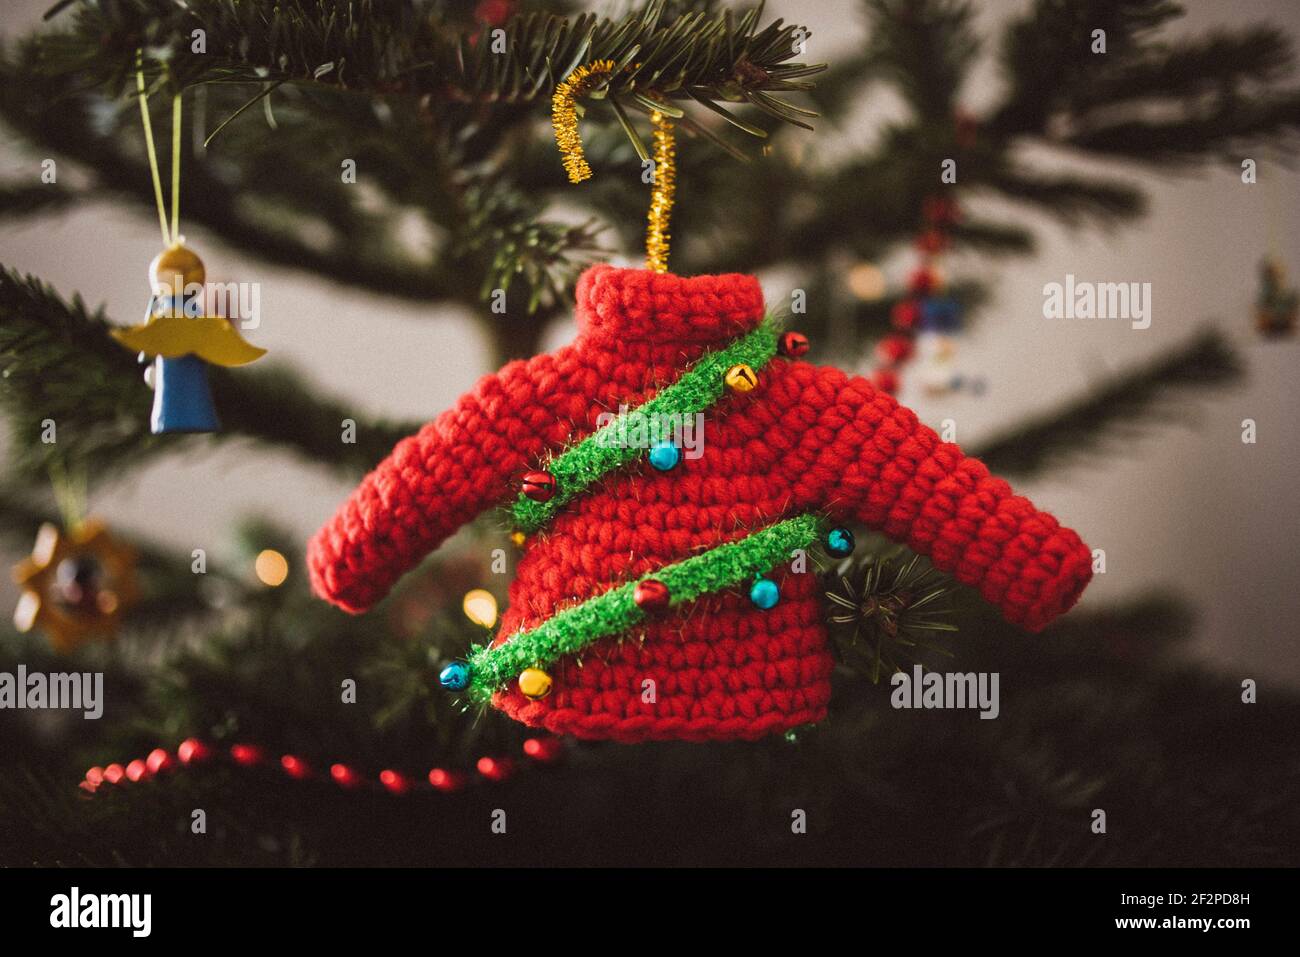 red Christmas jumper tree charm, self-crocheted tree decorations Stock Photo